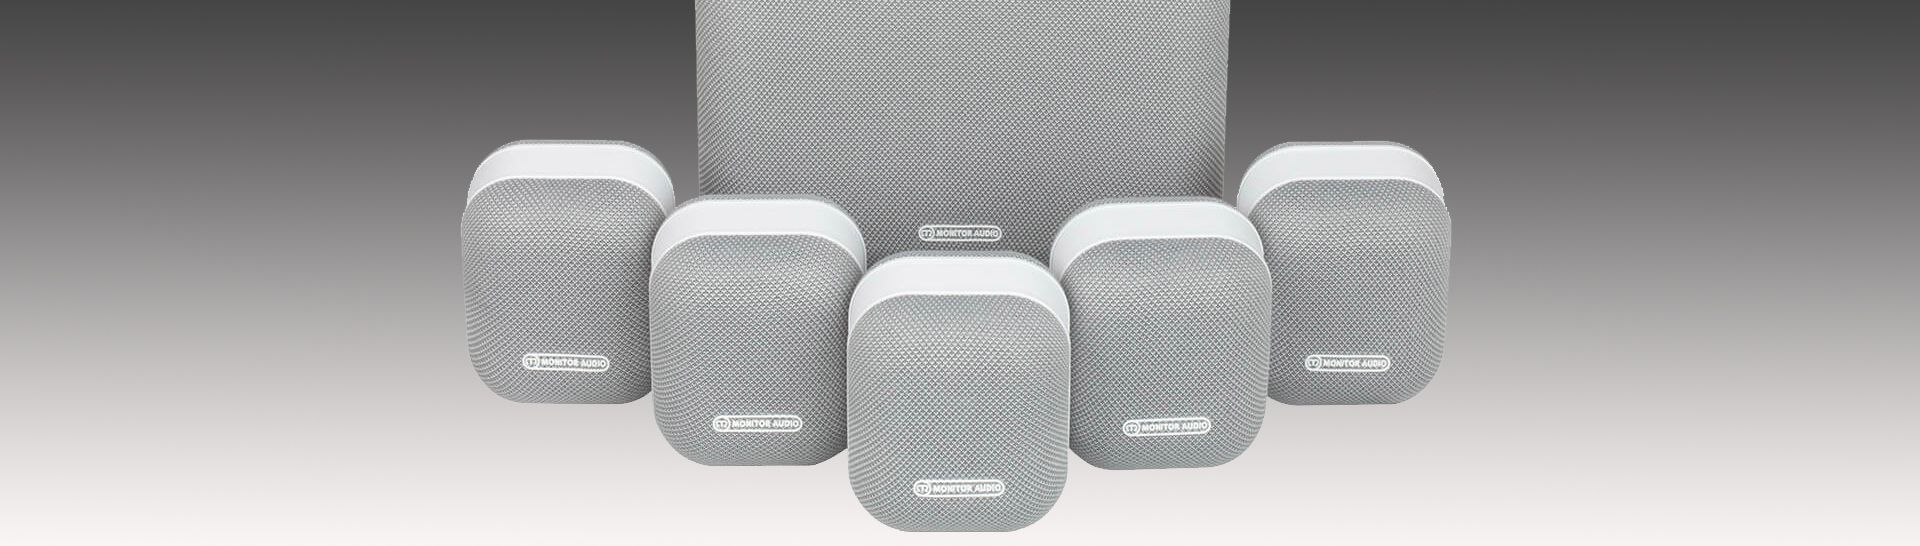 Surround sound speakers from Projectorpoint